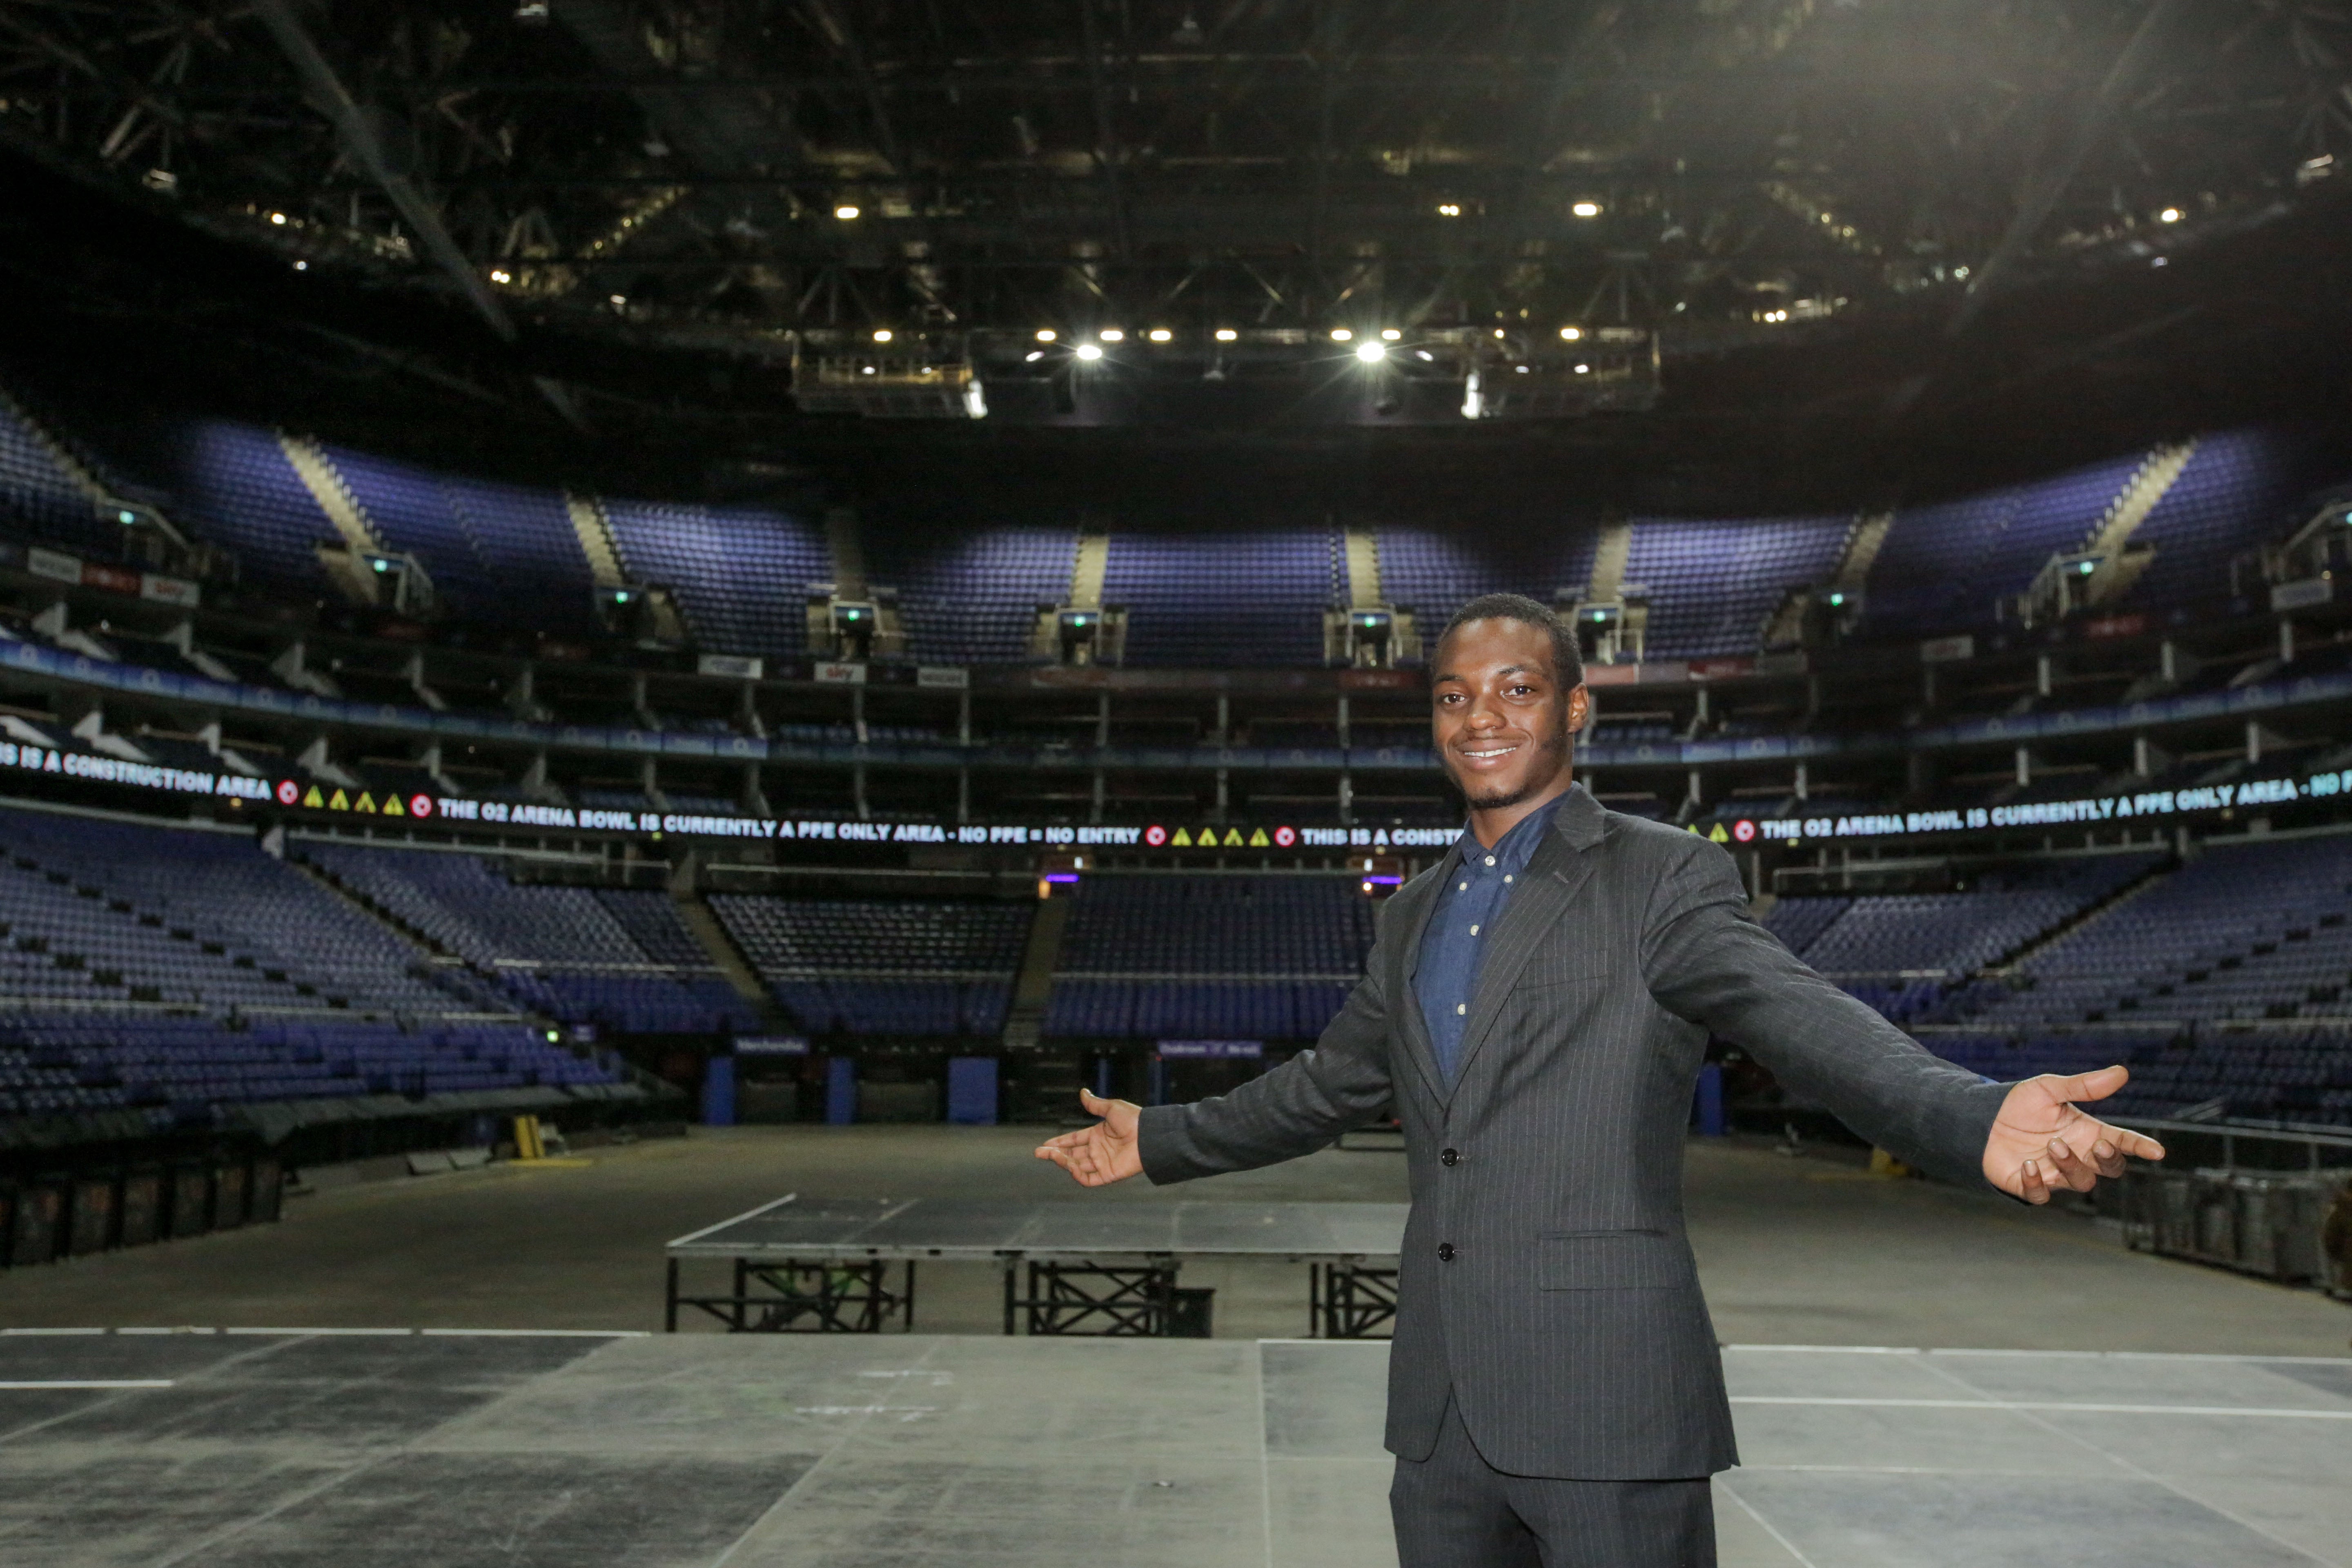 Devonte now works at the O2 after being helped by Springboard, one of our charity partners